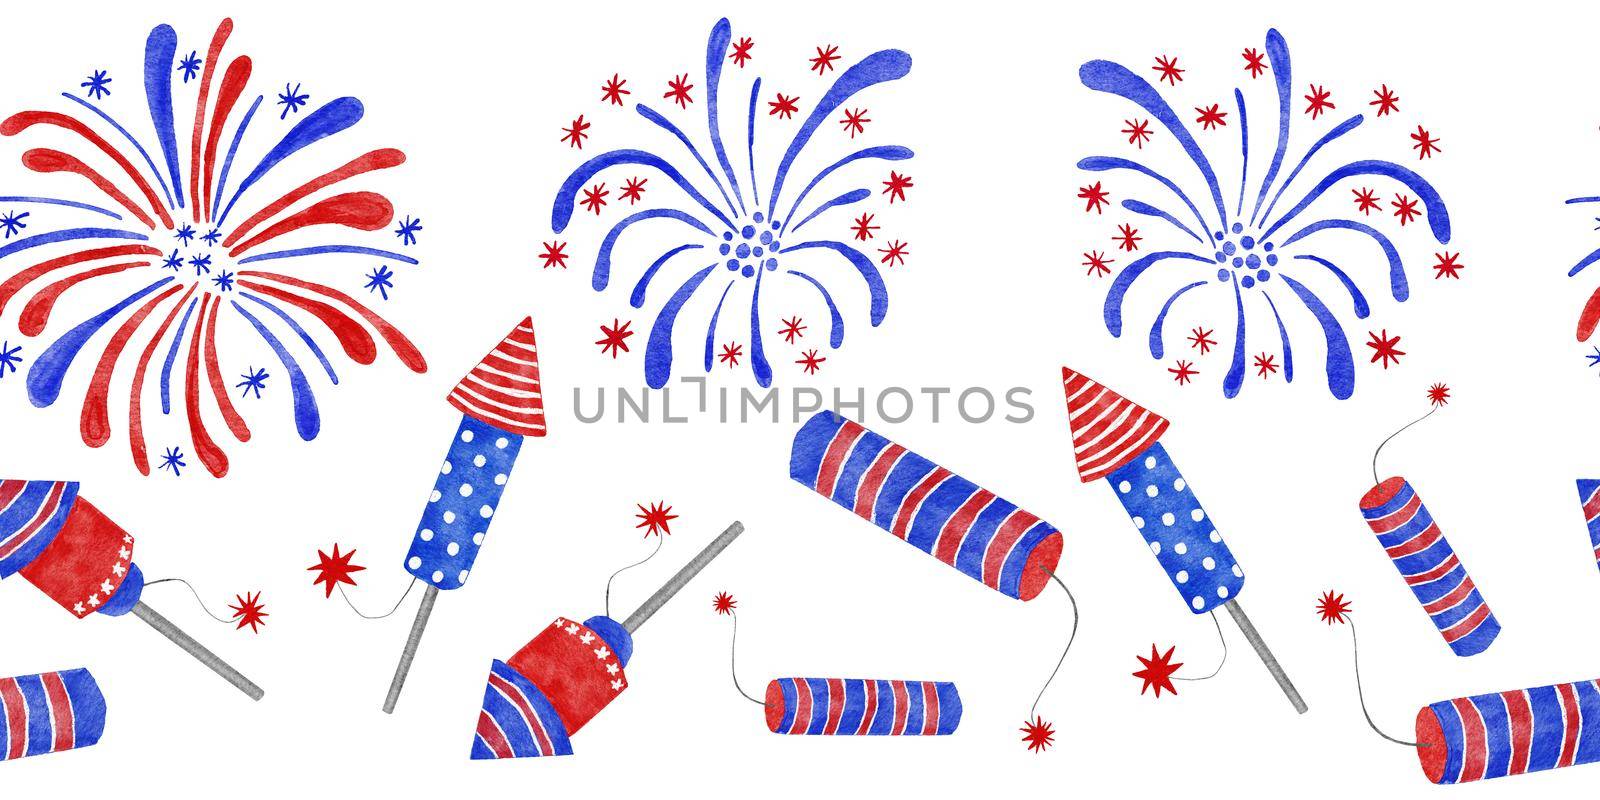 Watercolor seamless hand drawn horizontal border with 4th of July fireworks fire crackers, Fouth of july patriotic American design with party elements in blue red white colors. US celebration print. Salute fabric print funny bright design. by Lagmar